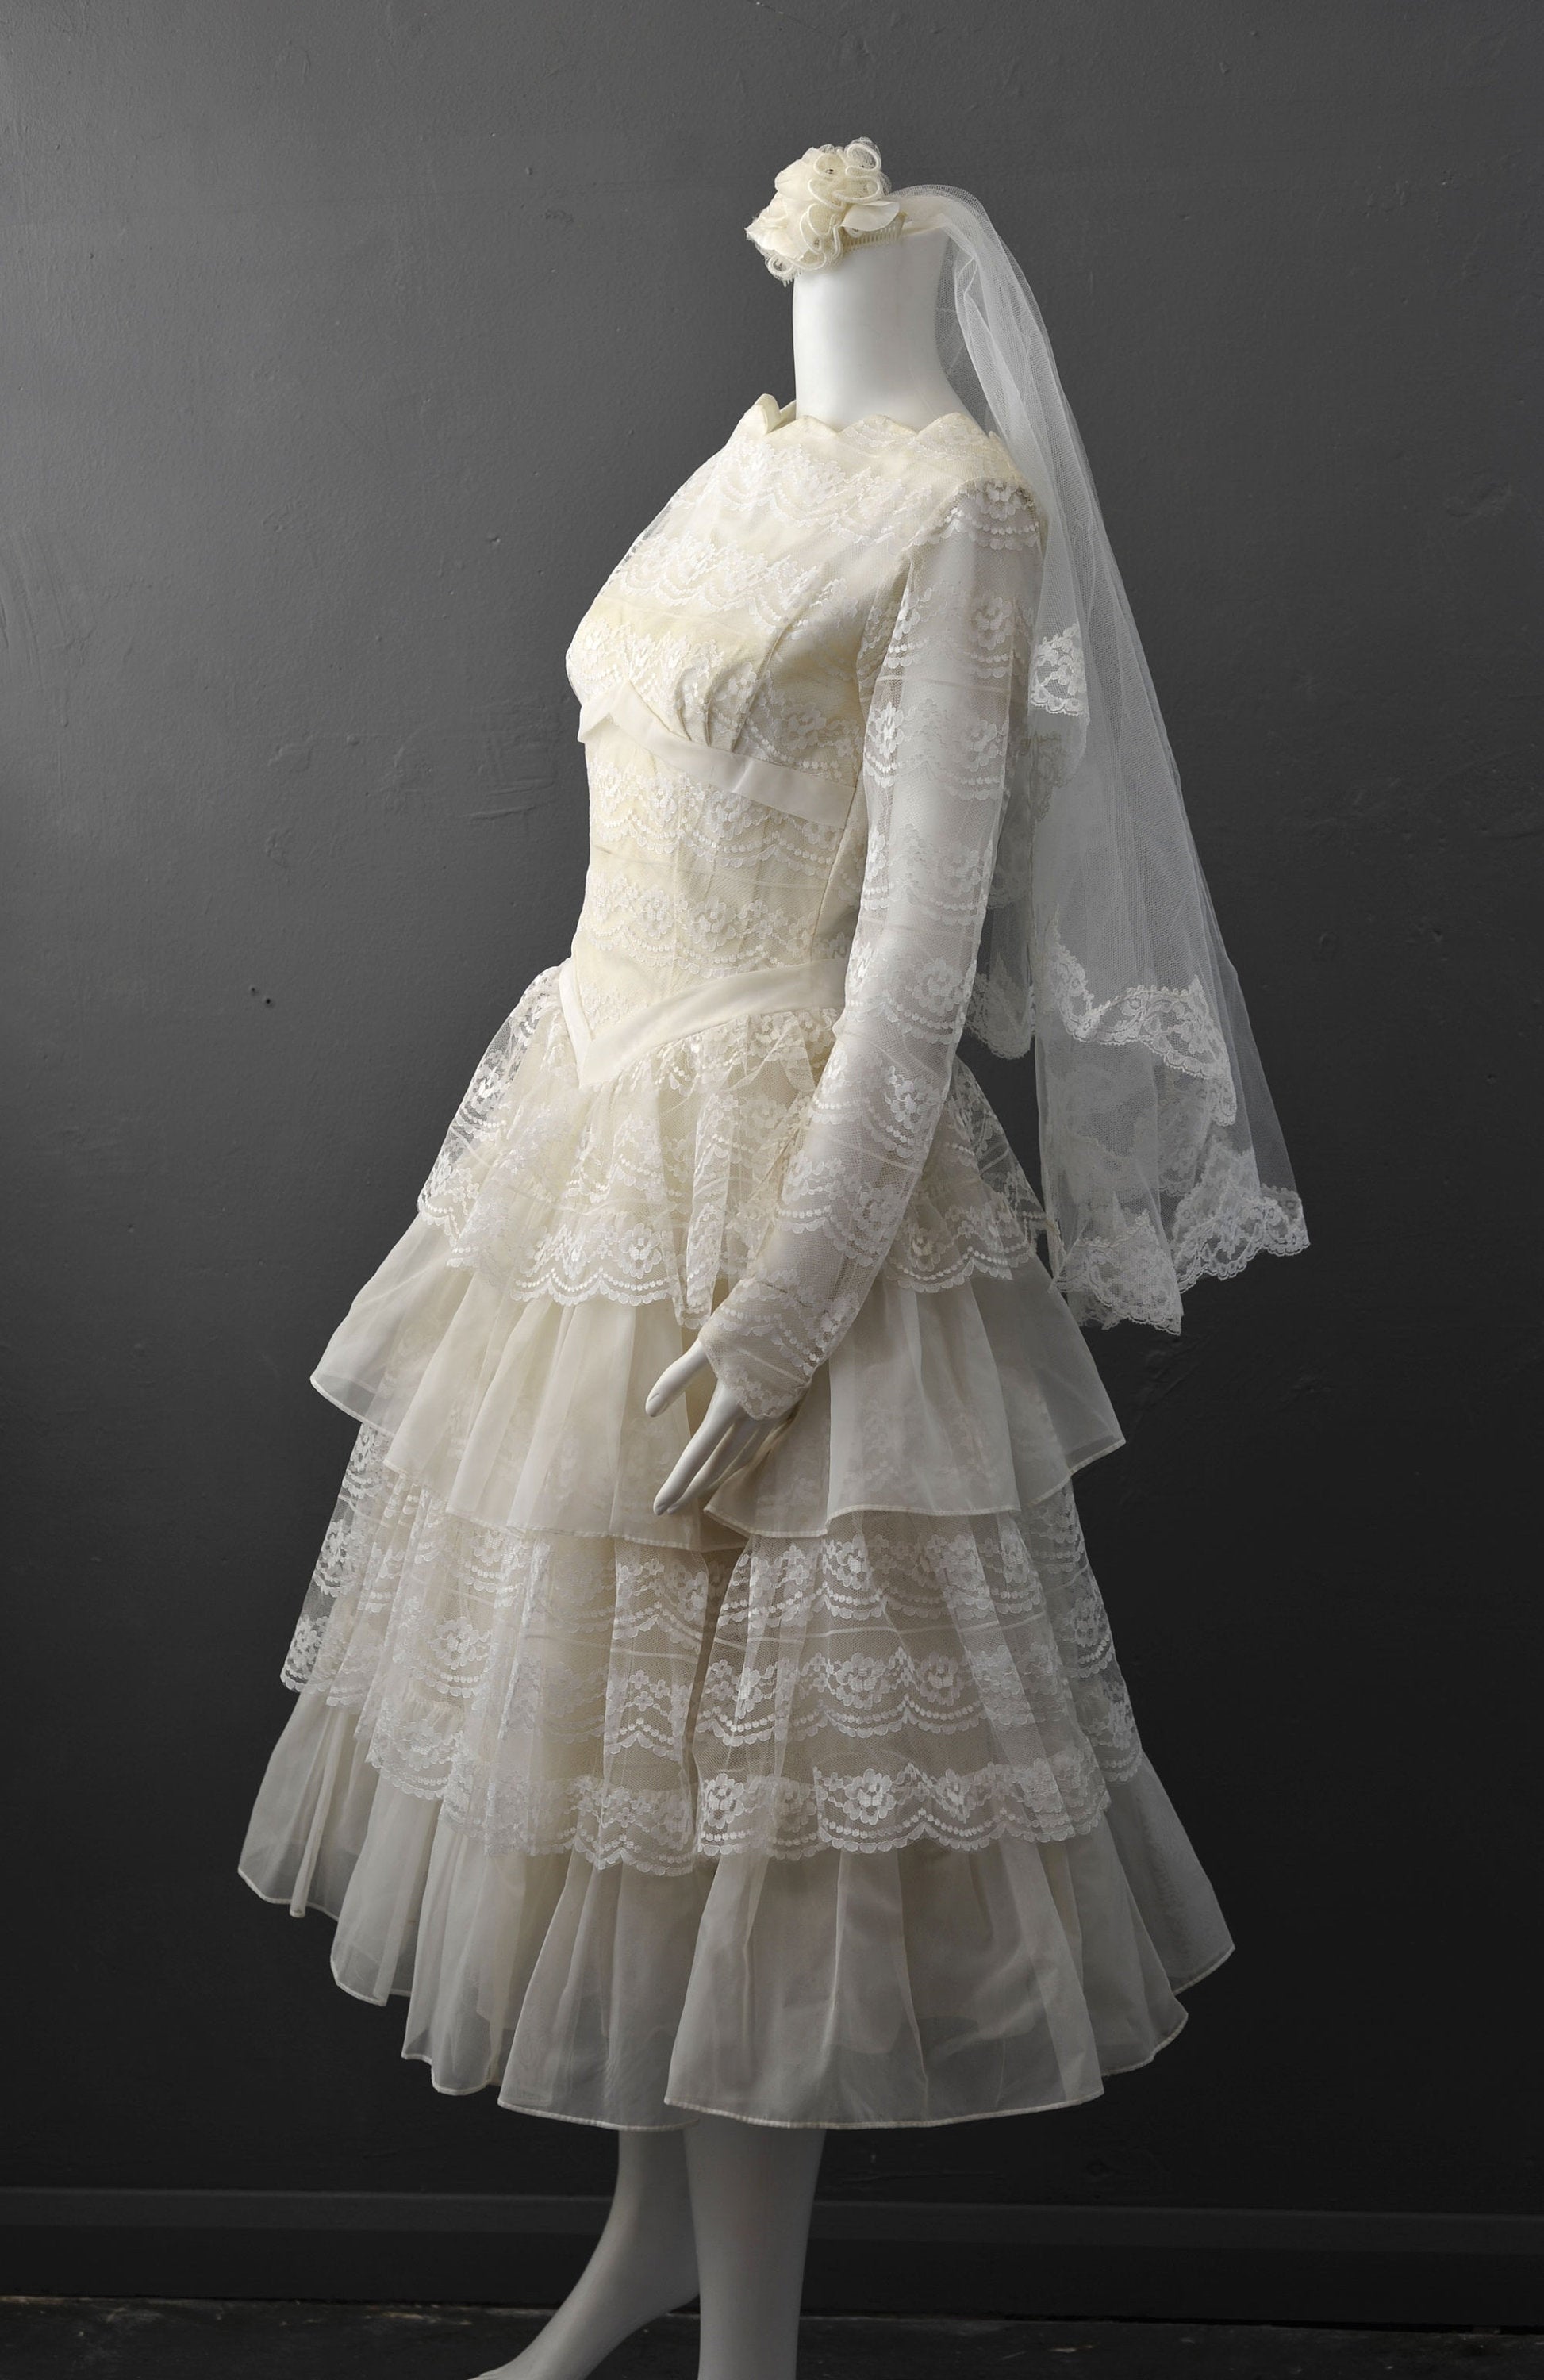 50s Tiered Lace Wedding Dress with Veil, Tea Length with Scalloped Boatneck, Size Small